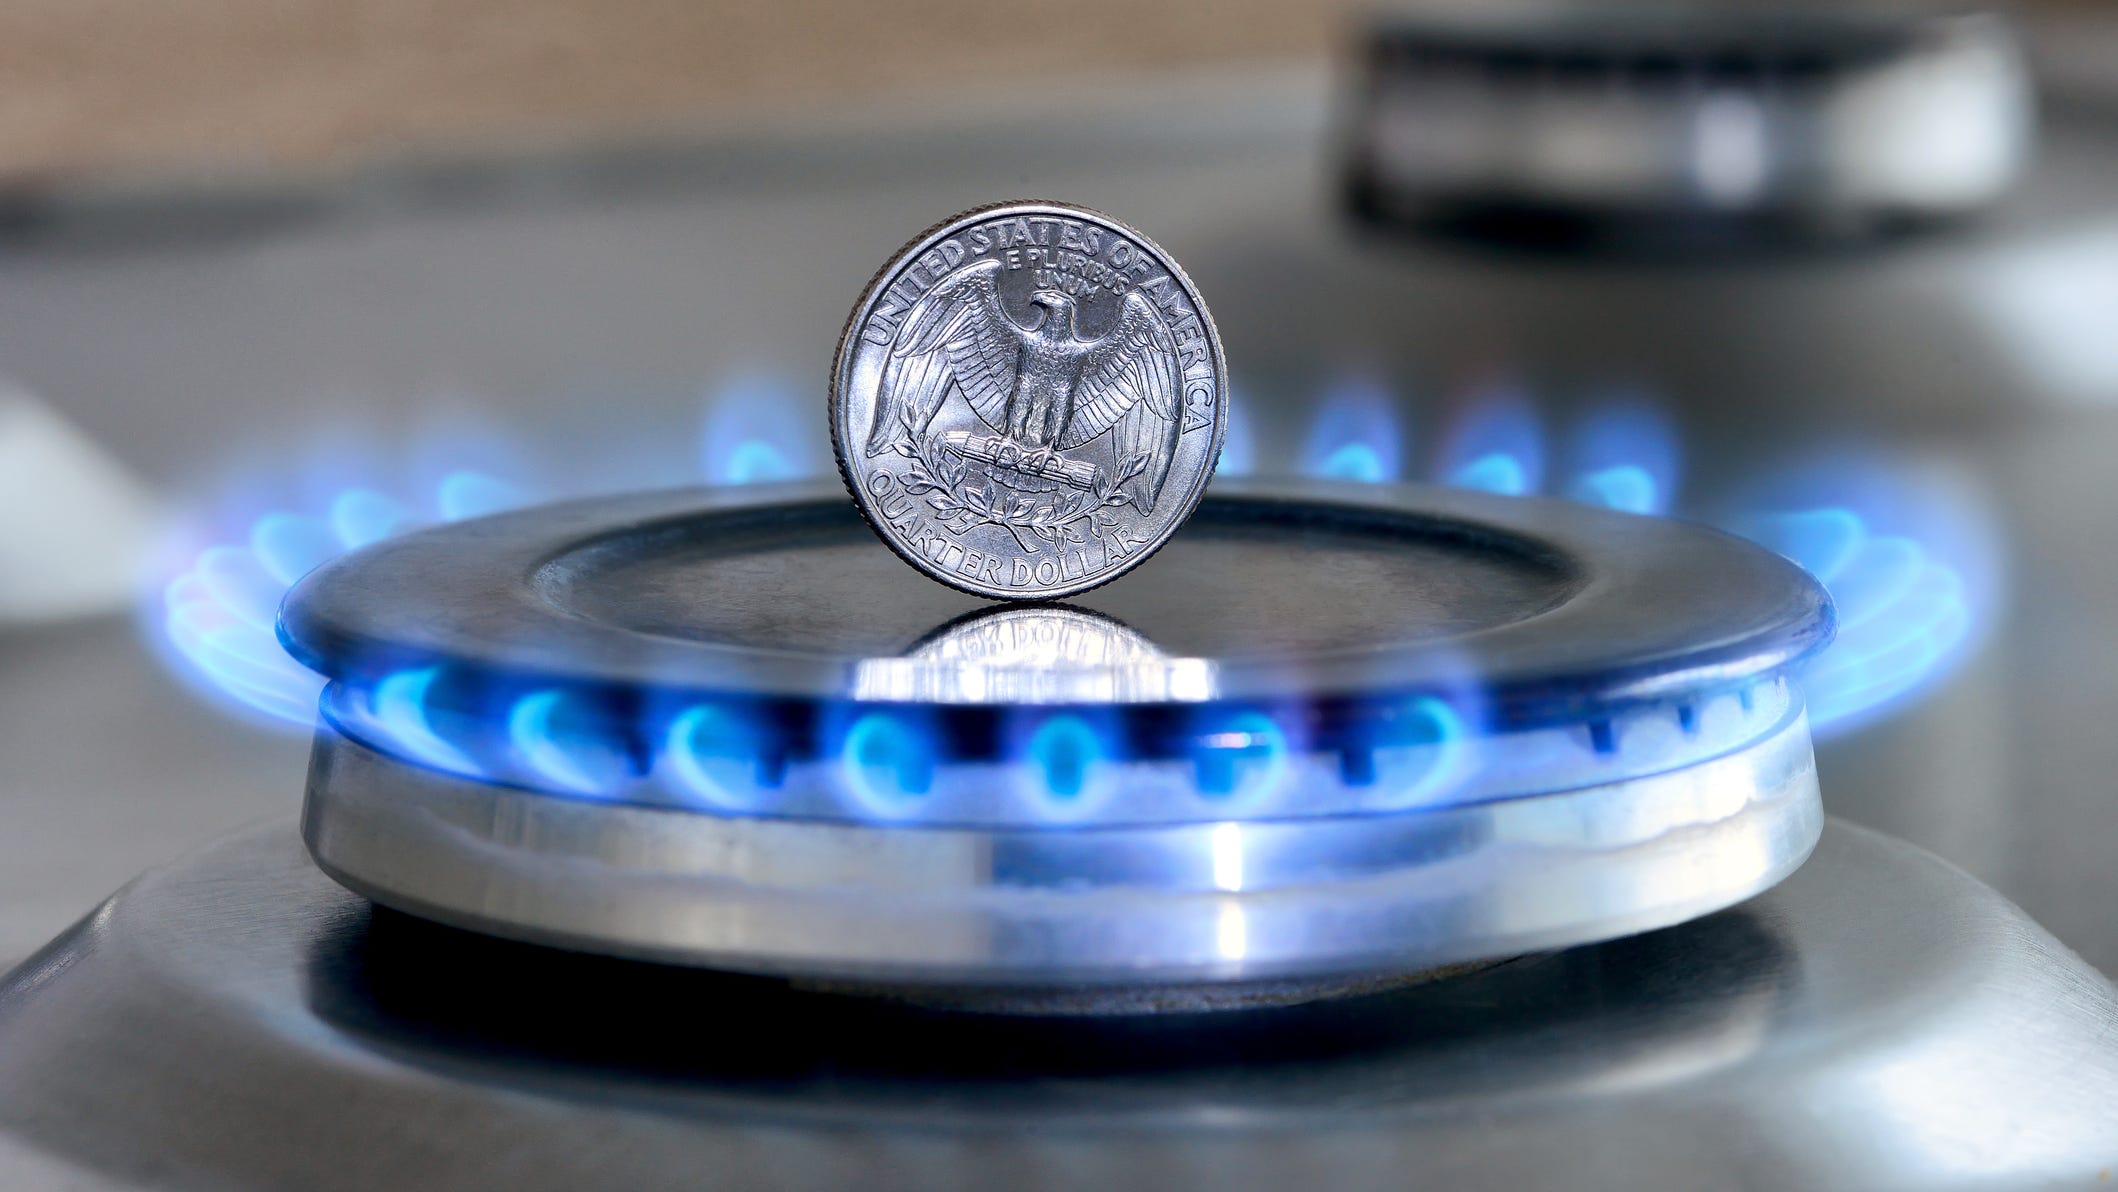 NJ Natural Gas Wants To Raise Rates Nearly 25 To Pay For Pipeline